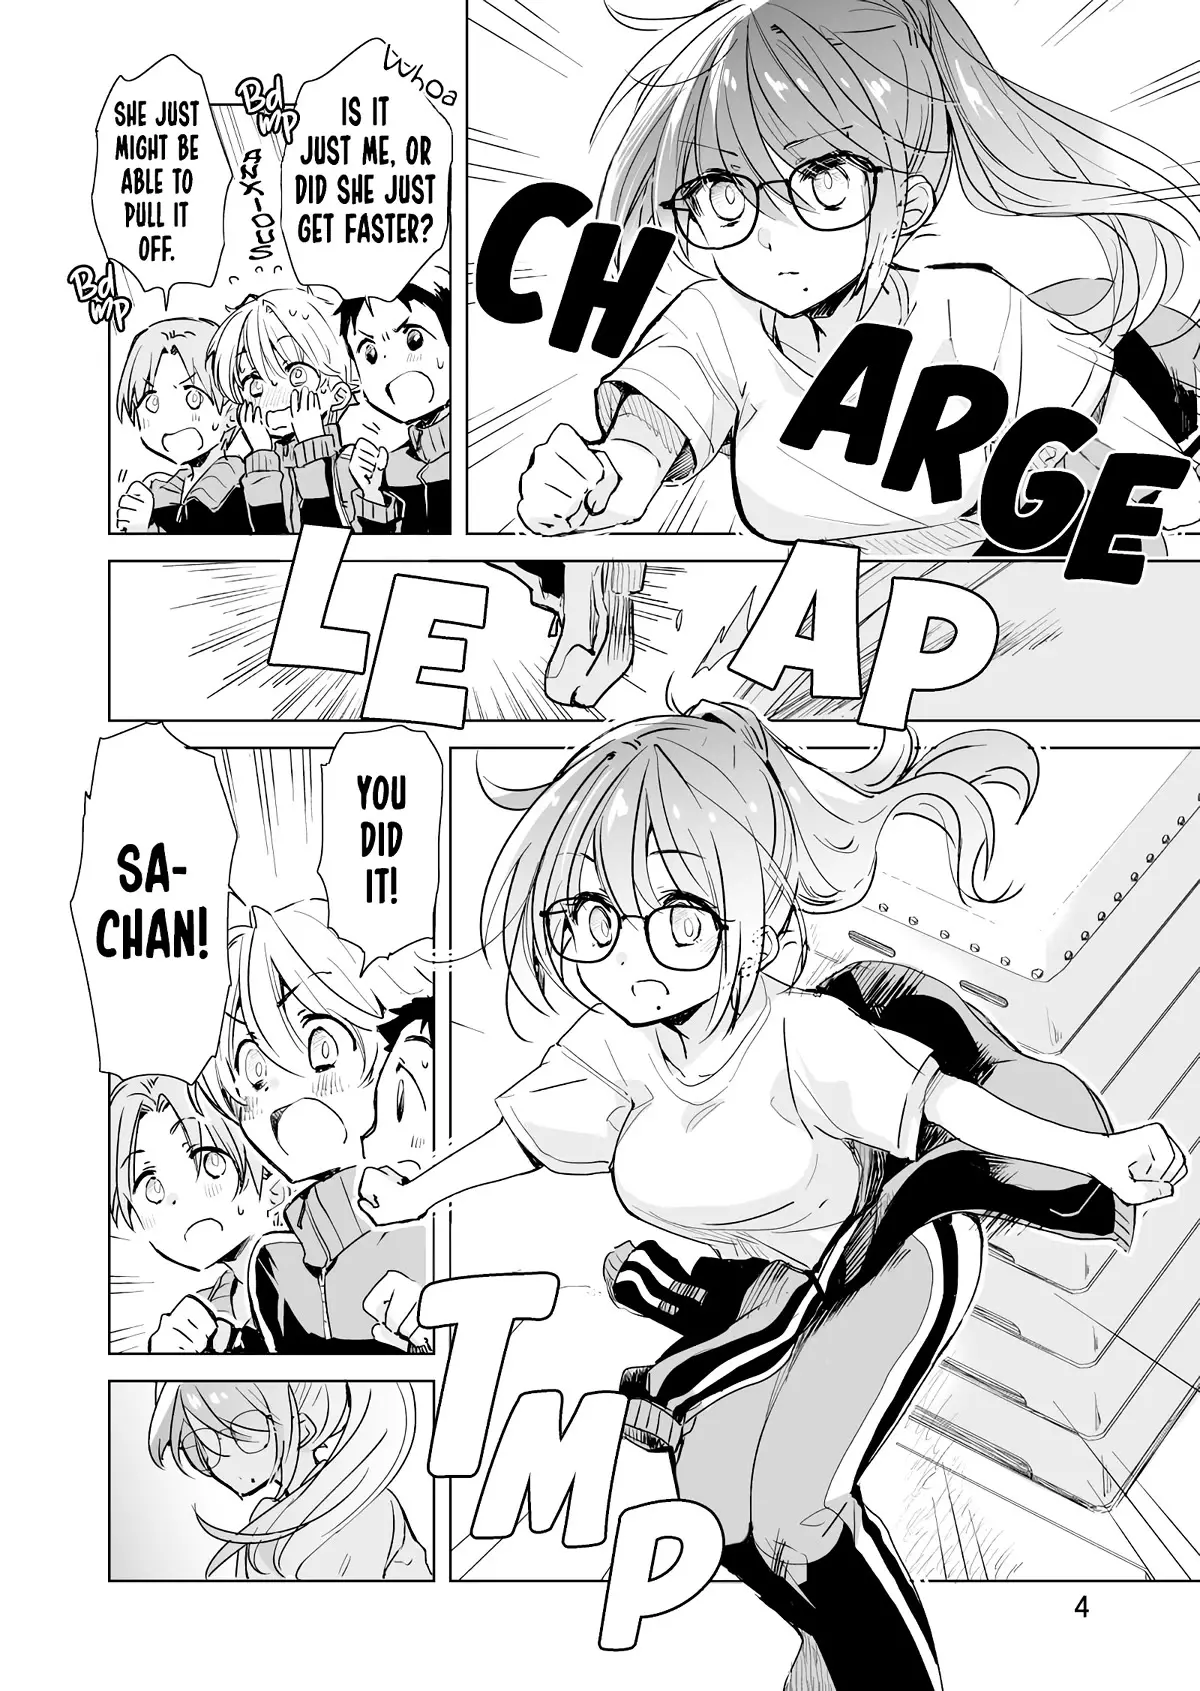 Daily Life Of Sa-Chan, A Drugstore Clerk - 12 page 4-347e1472